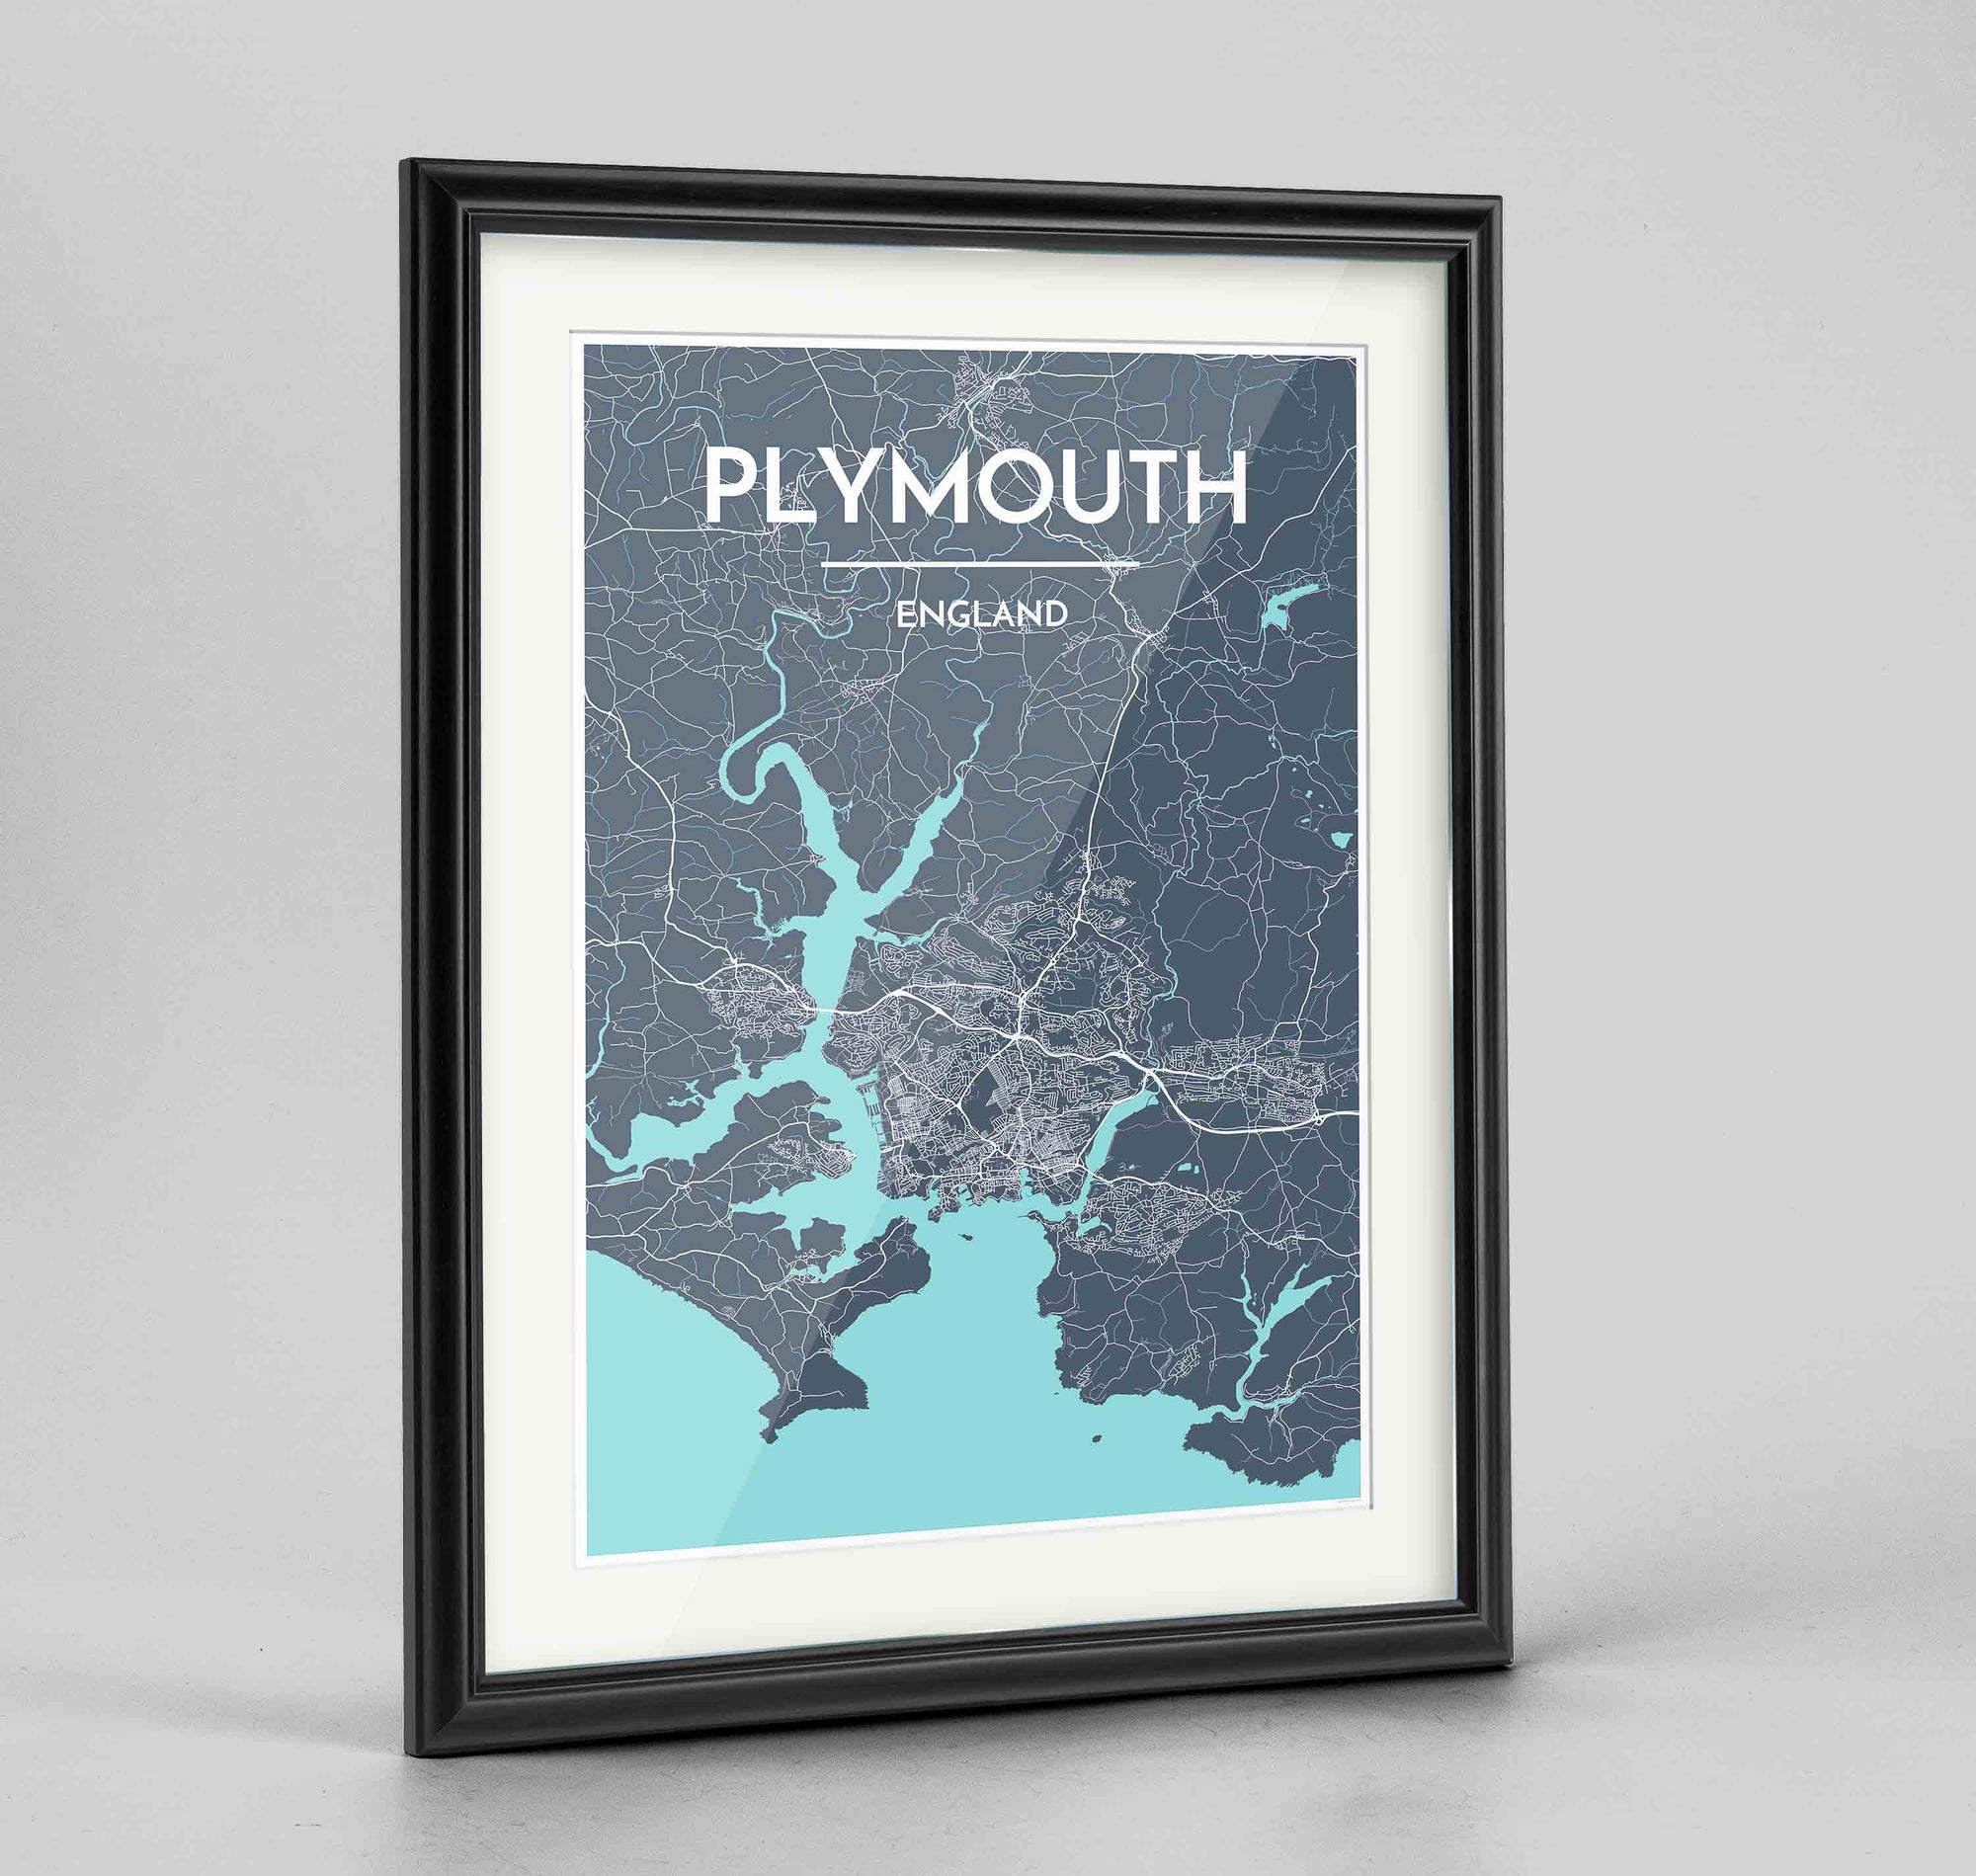 Framed Plymouth Map Art Print 24x36" Traditional Black frame Point Two Design Group